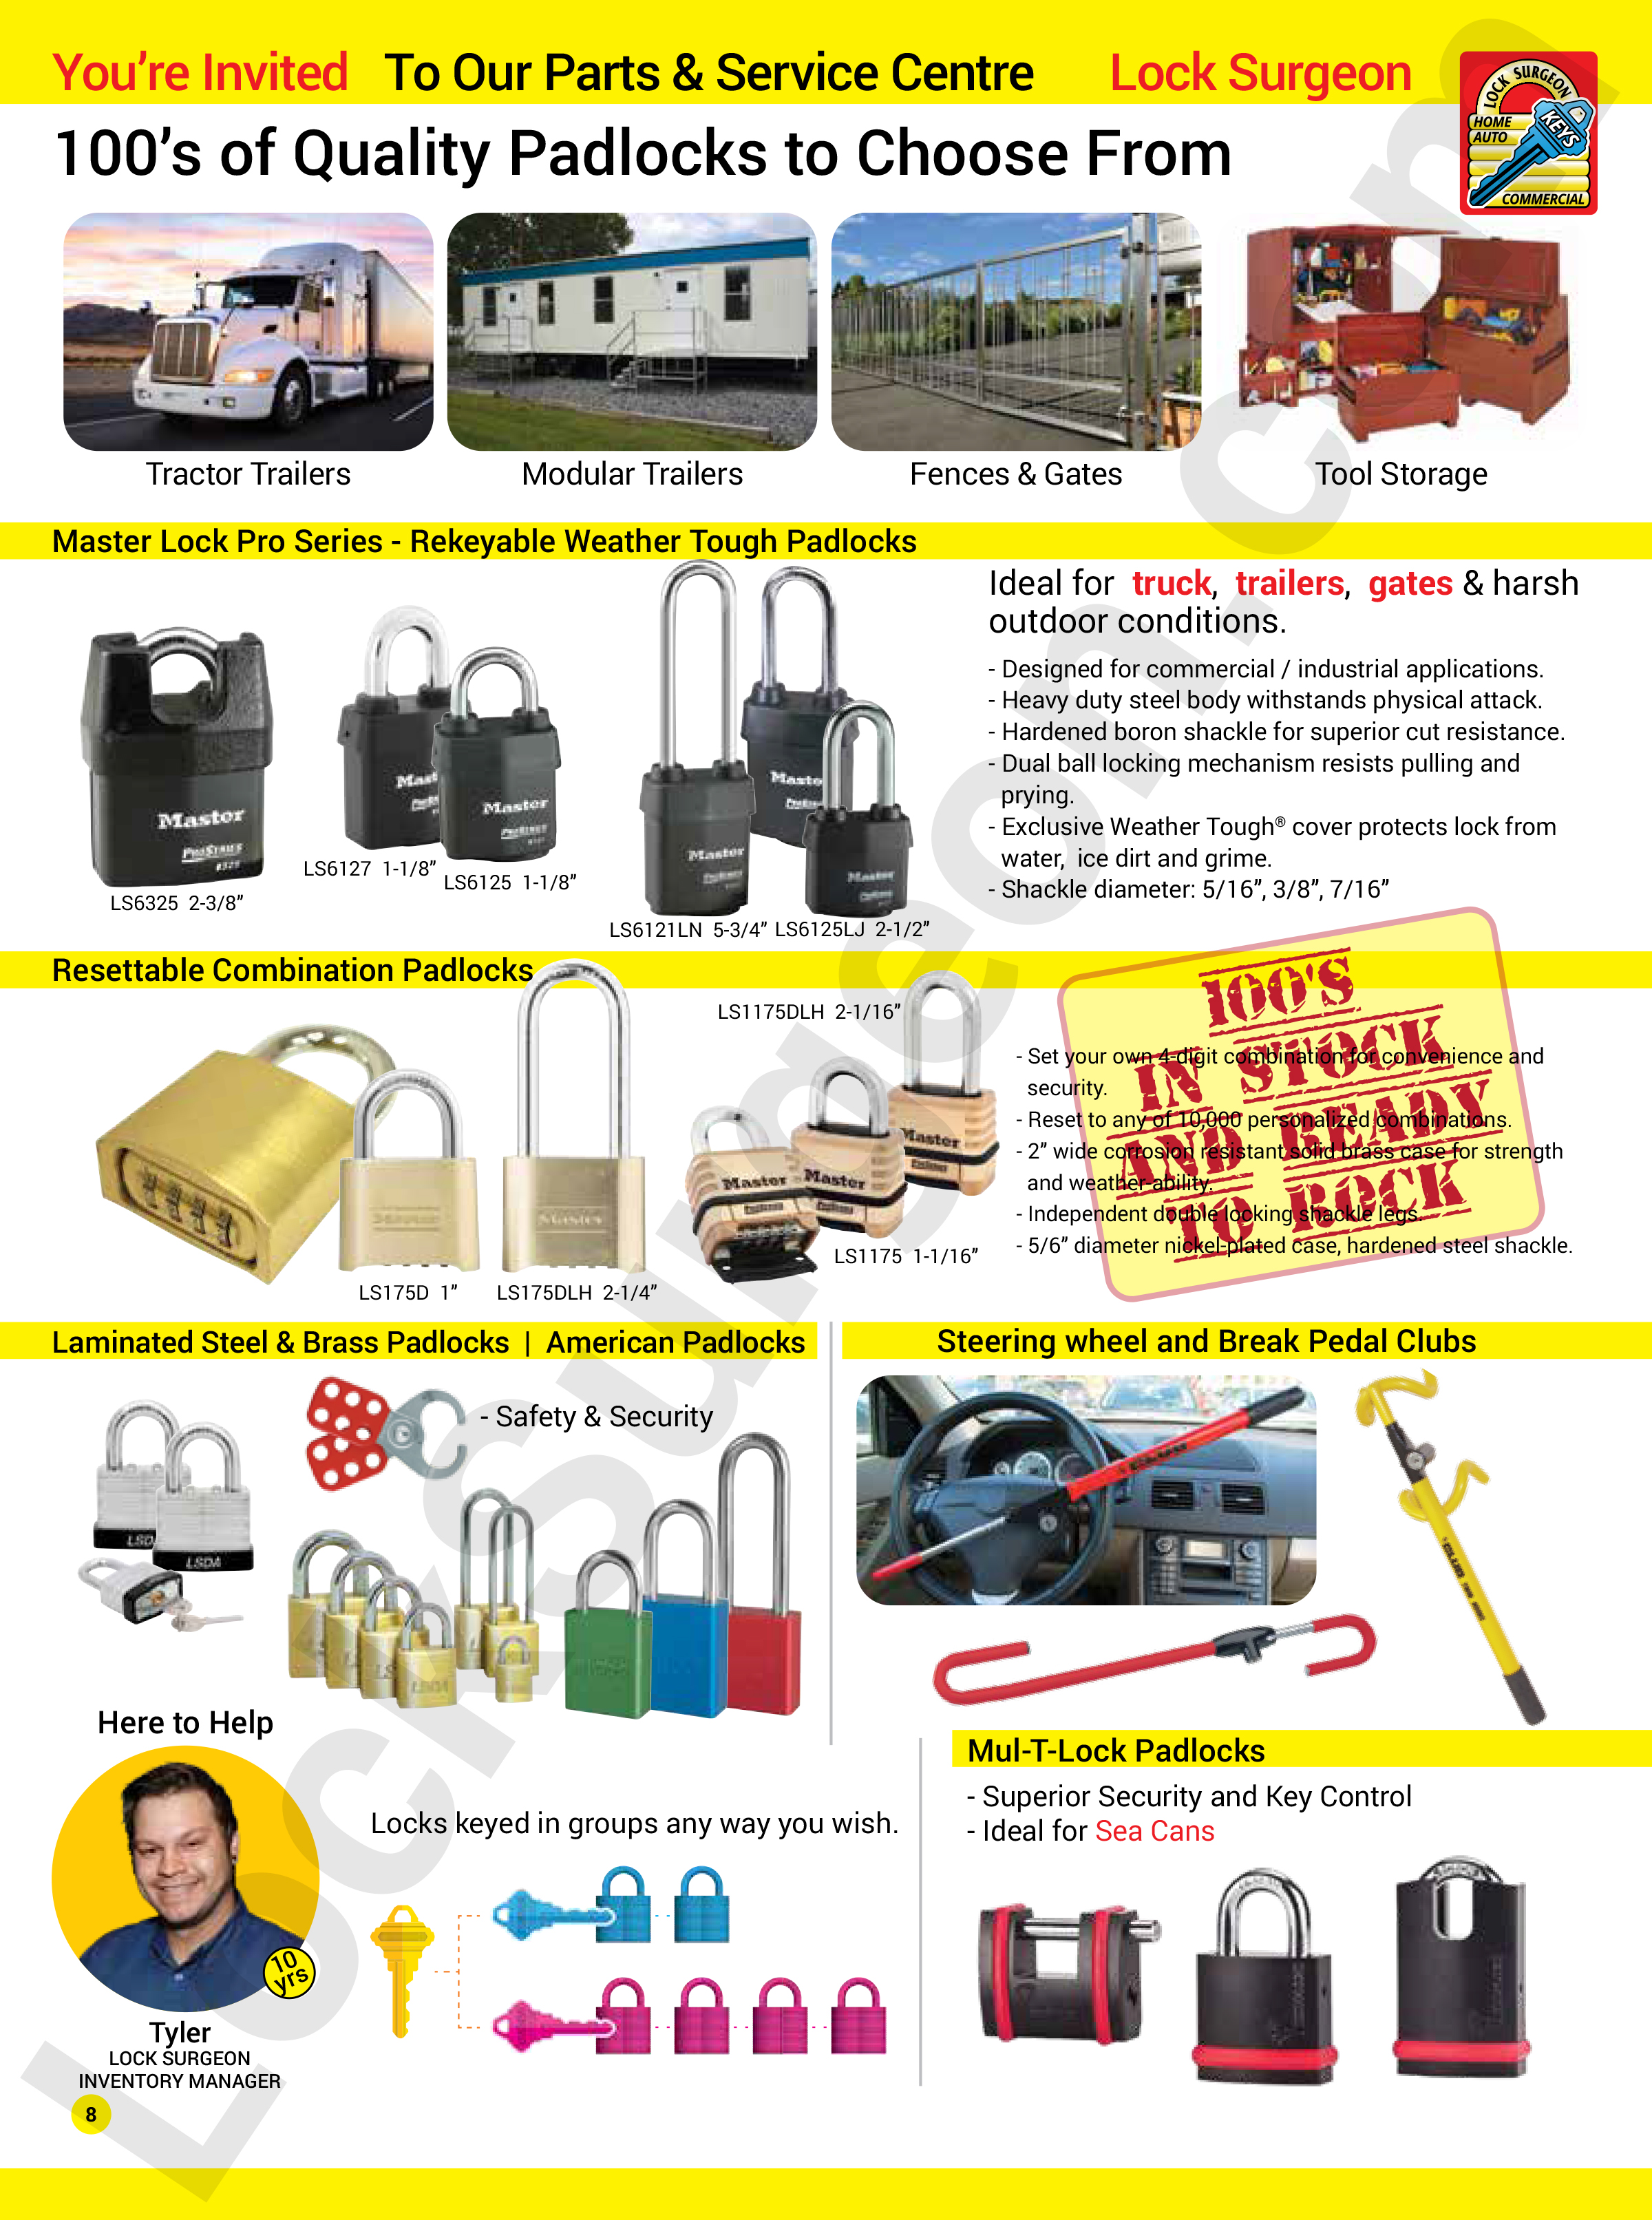 Hundreds of quality padlocks to choose from. Keyed alike or keyed different. Secure your property. Master lock pro series, weather tough padlocks, resettable combination locks, laminated steel and brass padlocks. American padlocks. Steering wheel and break pedal clubs. Mul-T-Lock high-security padlocks. Ideal for tractor trailers, modular trailers, fences, gates and tool storage.